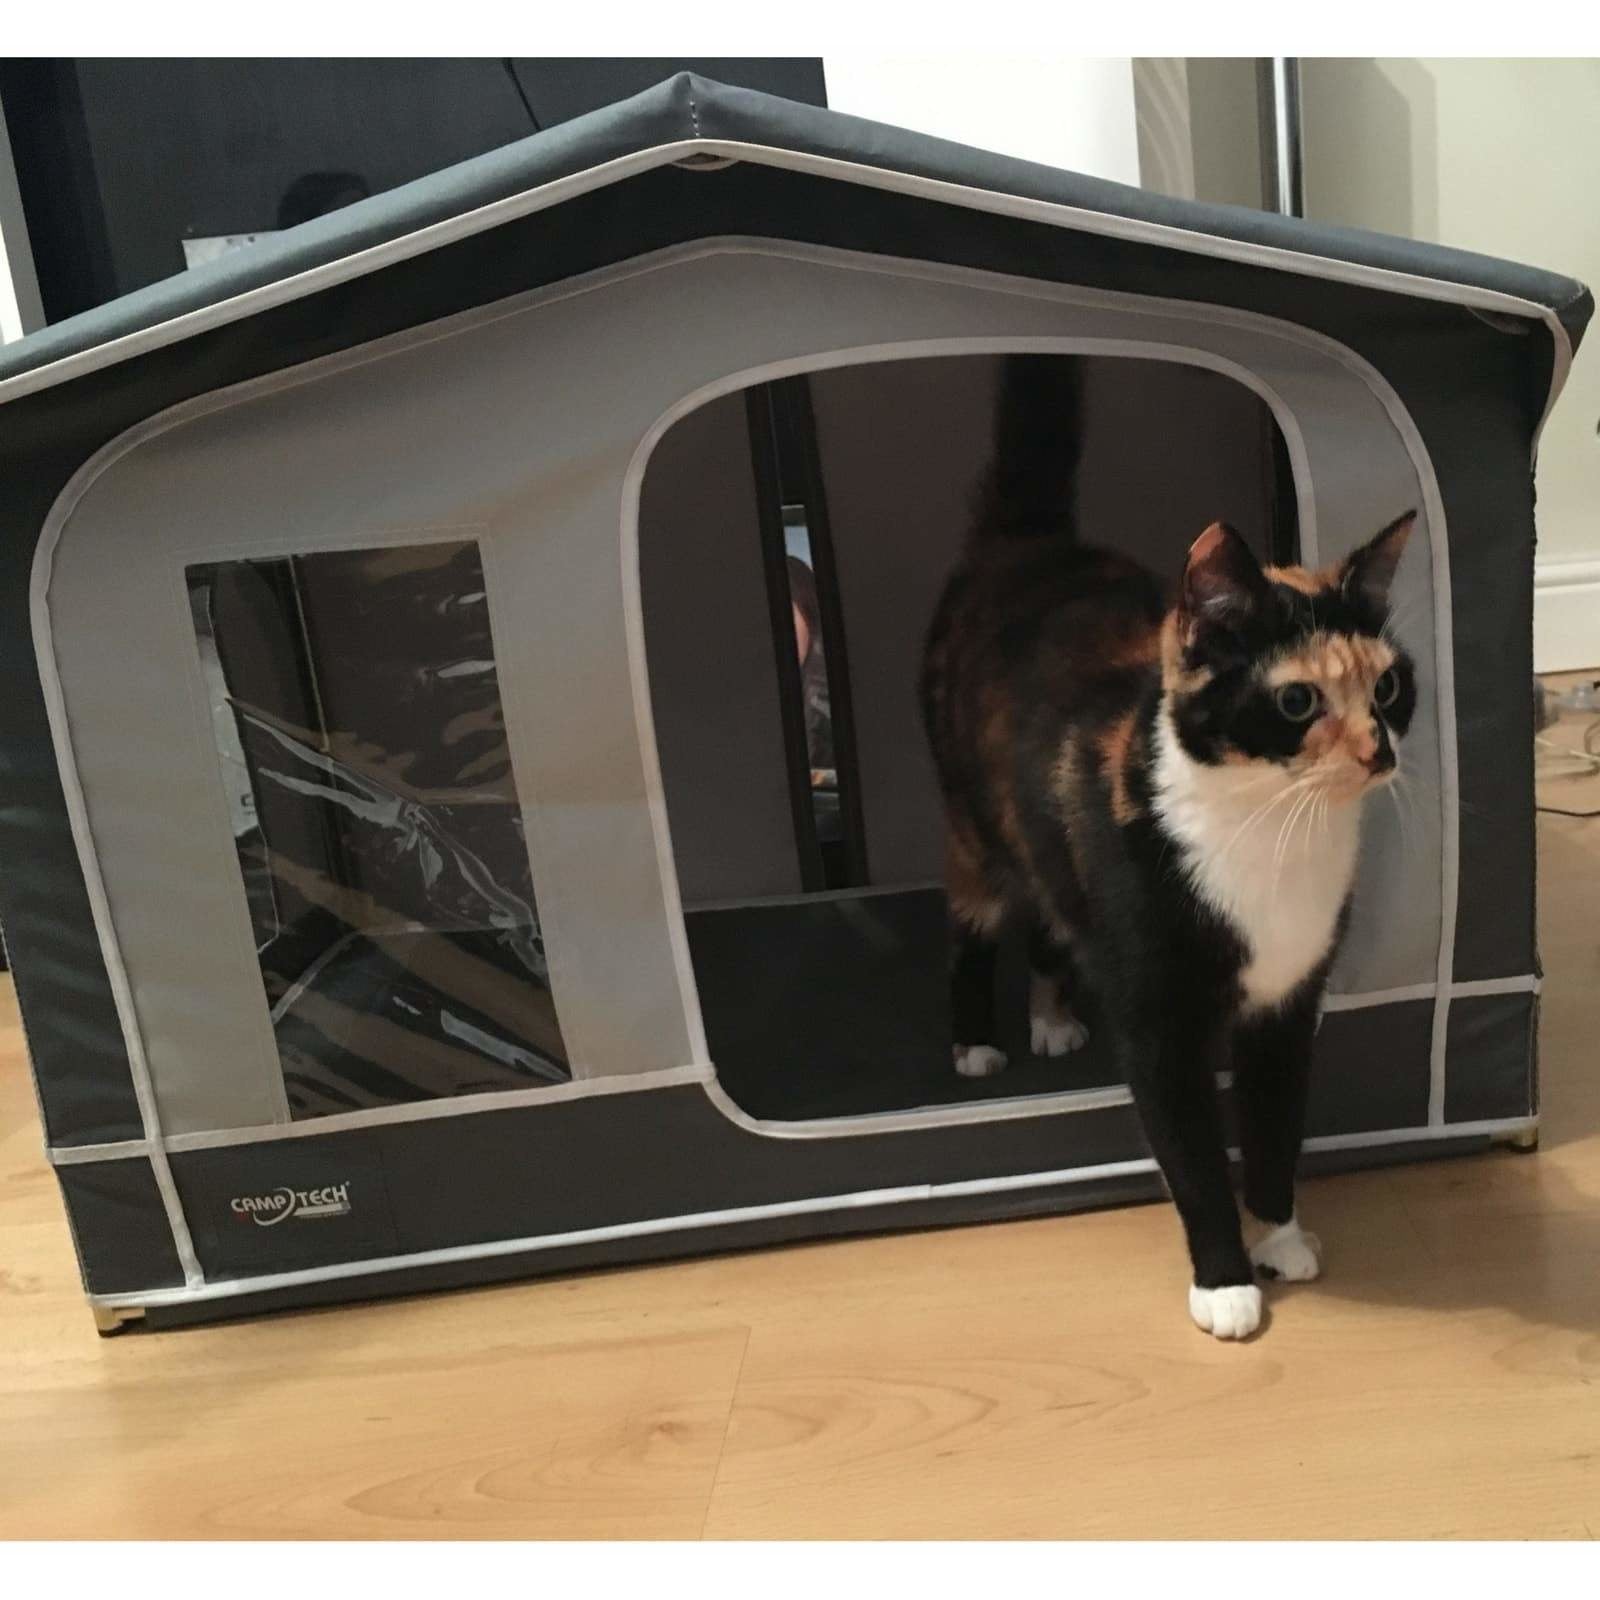 Camptech Pet House - Traditional Mini Awning for Cats & Dogs SL5006 (2019) made by CampTech. A Pet House sold by Quality Caravan Awnings